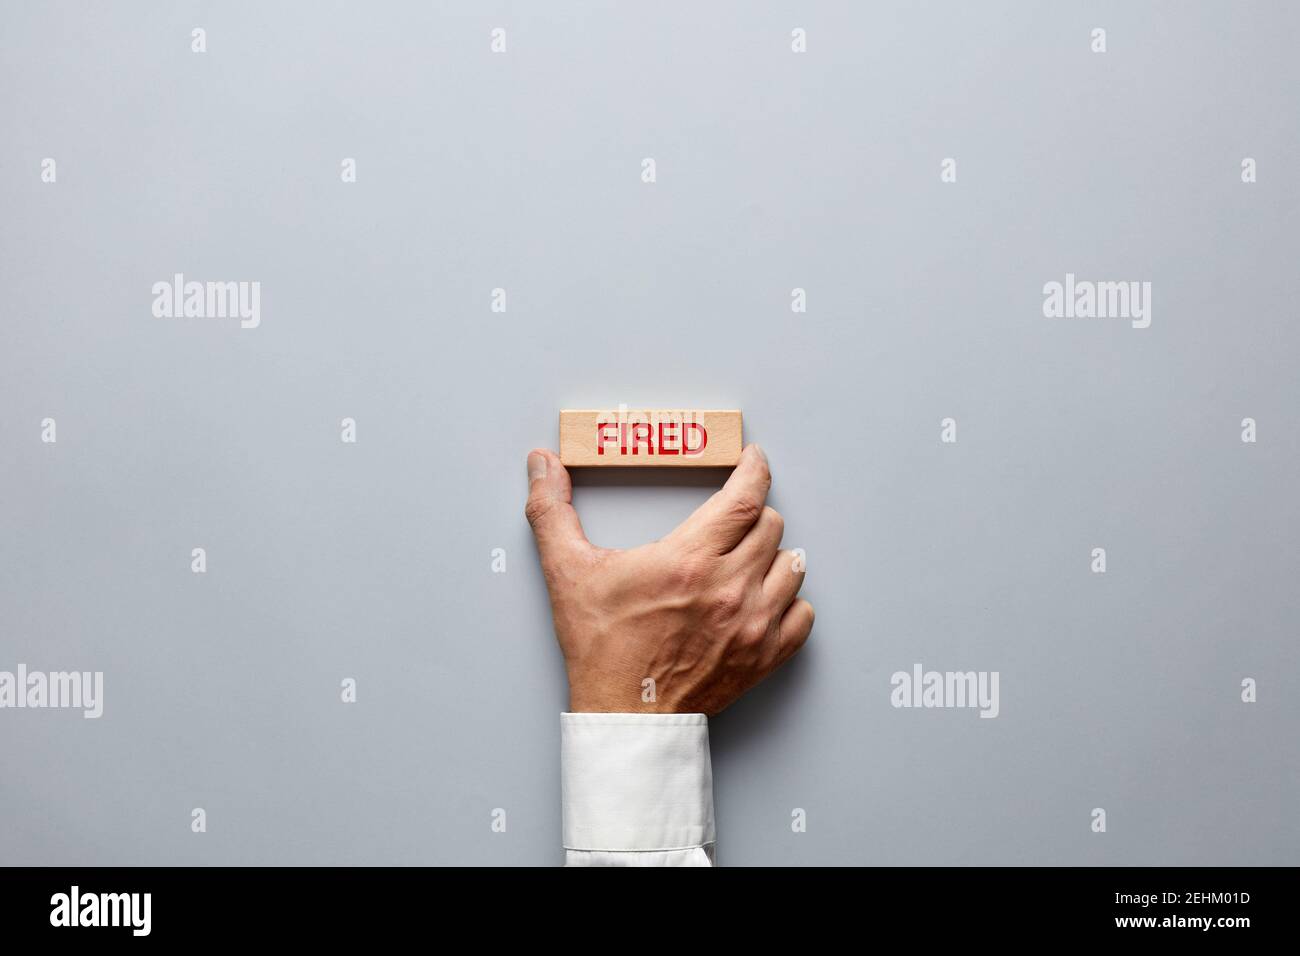 Businessman hand holding a wooden block with the word fired on it. Job dismissal or unemployment concept. Stock Photo